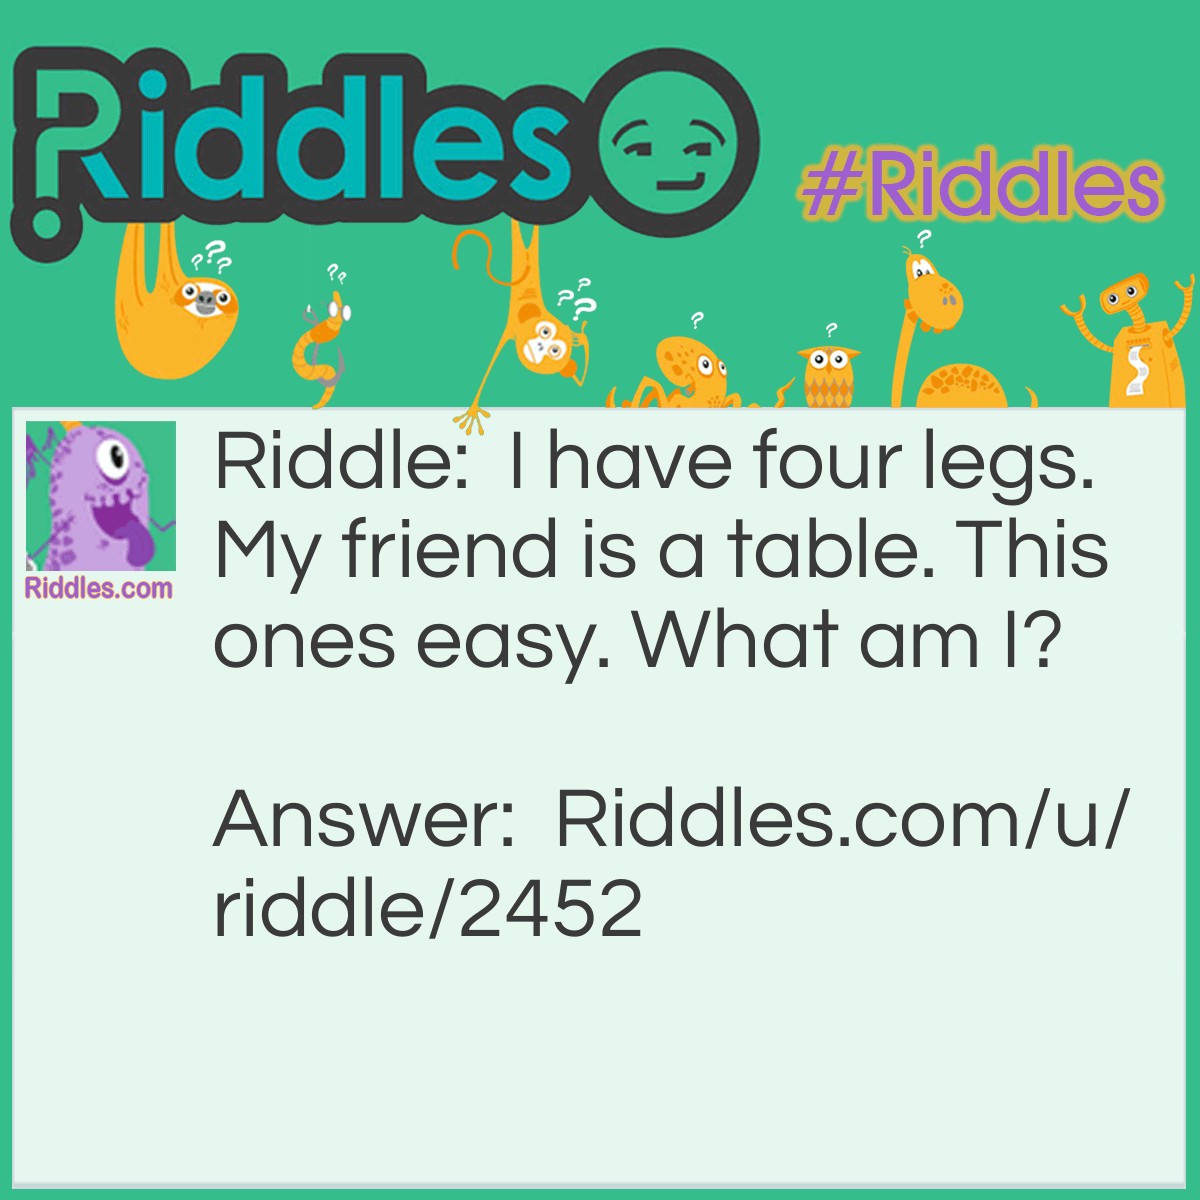 Riddle: I have four legs. My friend is a table. This ones easy. What am I? Answer: A chair.